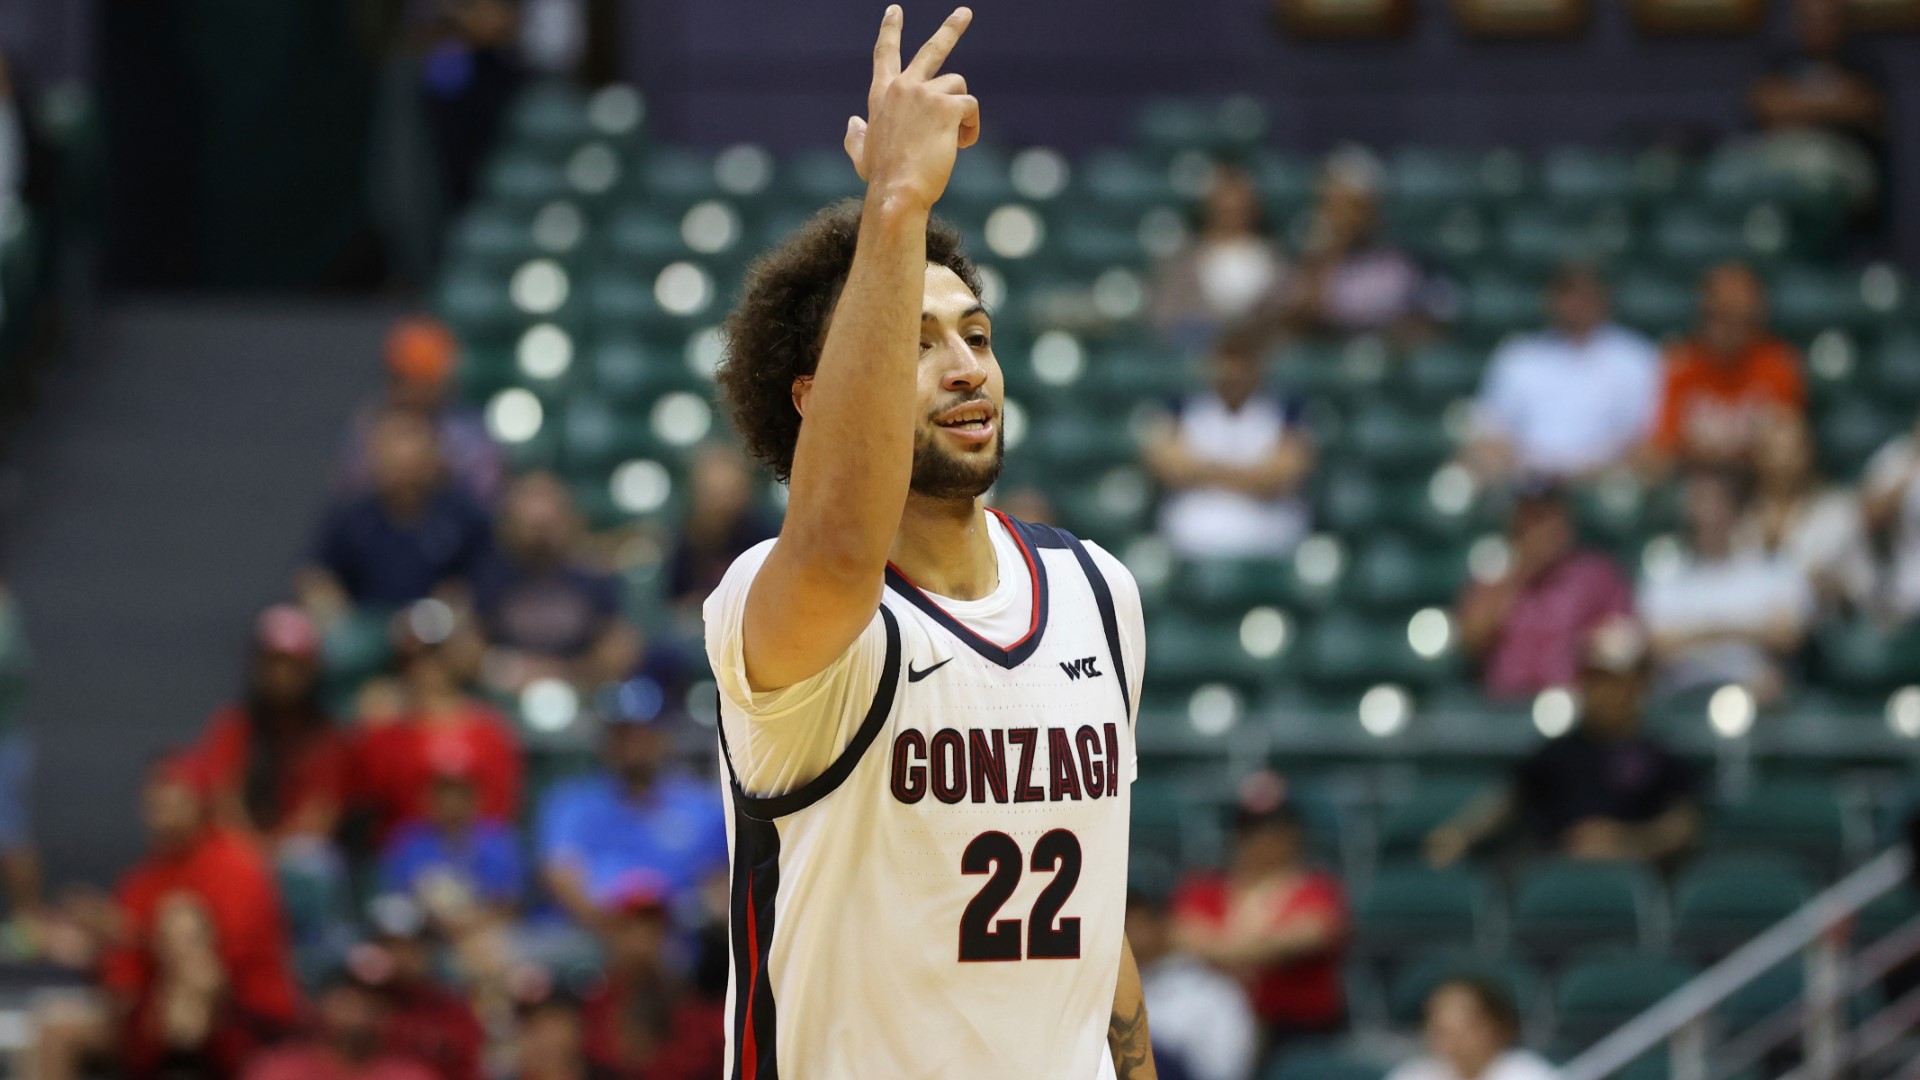 Anton Watson's journey to being the leader of the Gonzaga men's basketball team